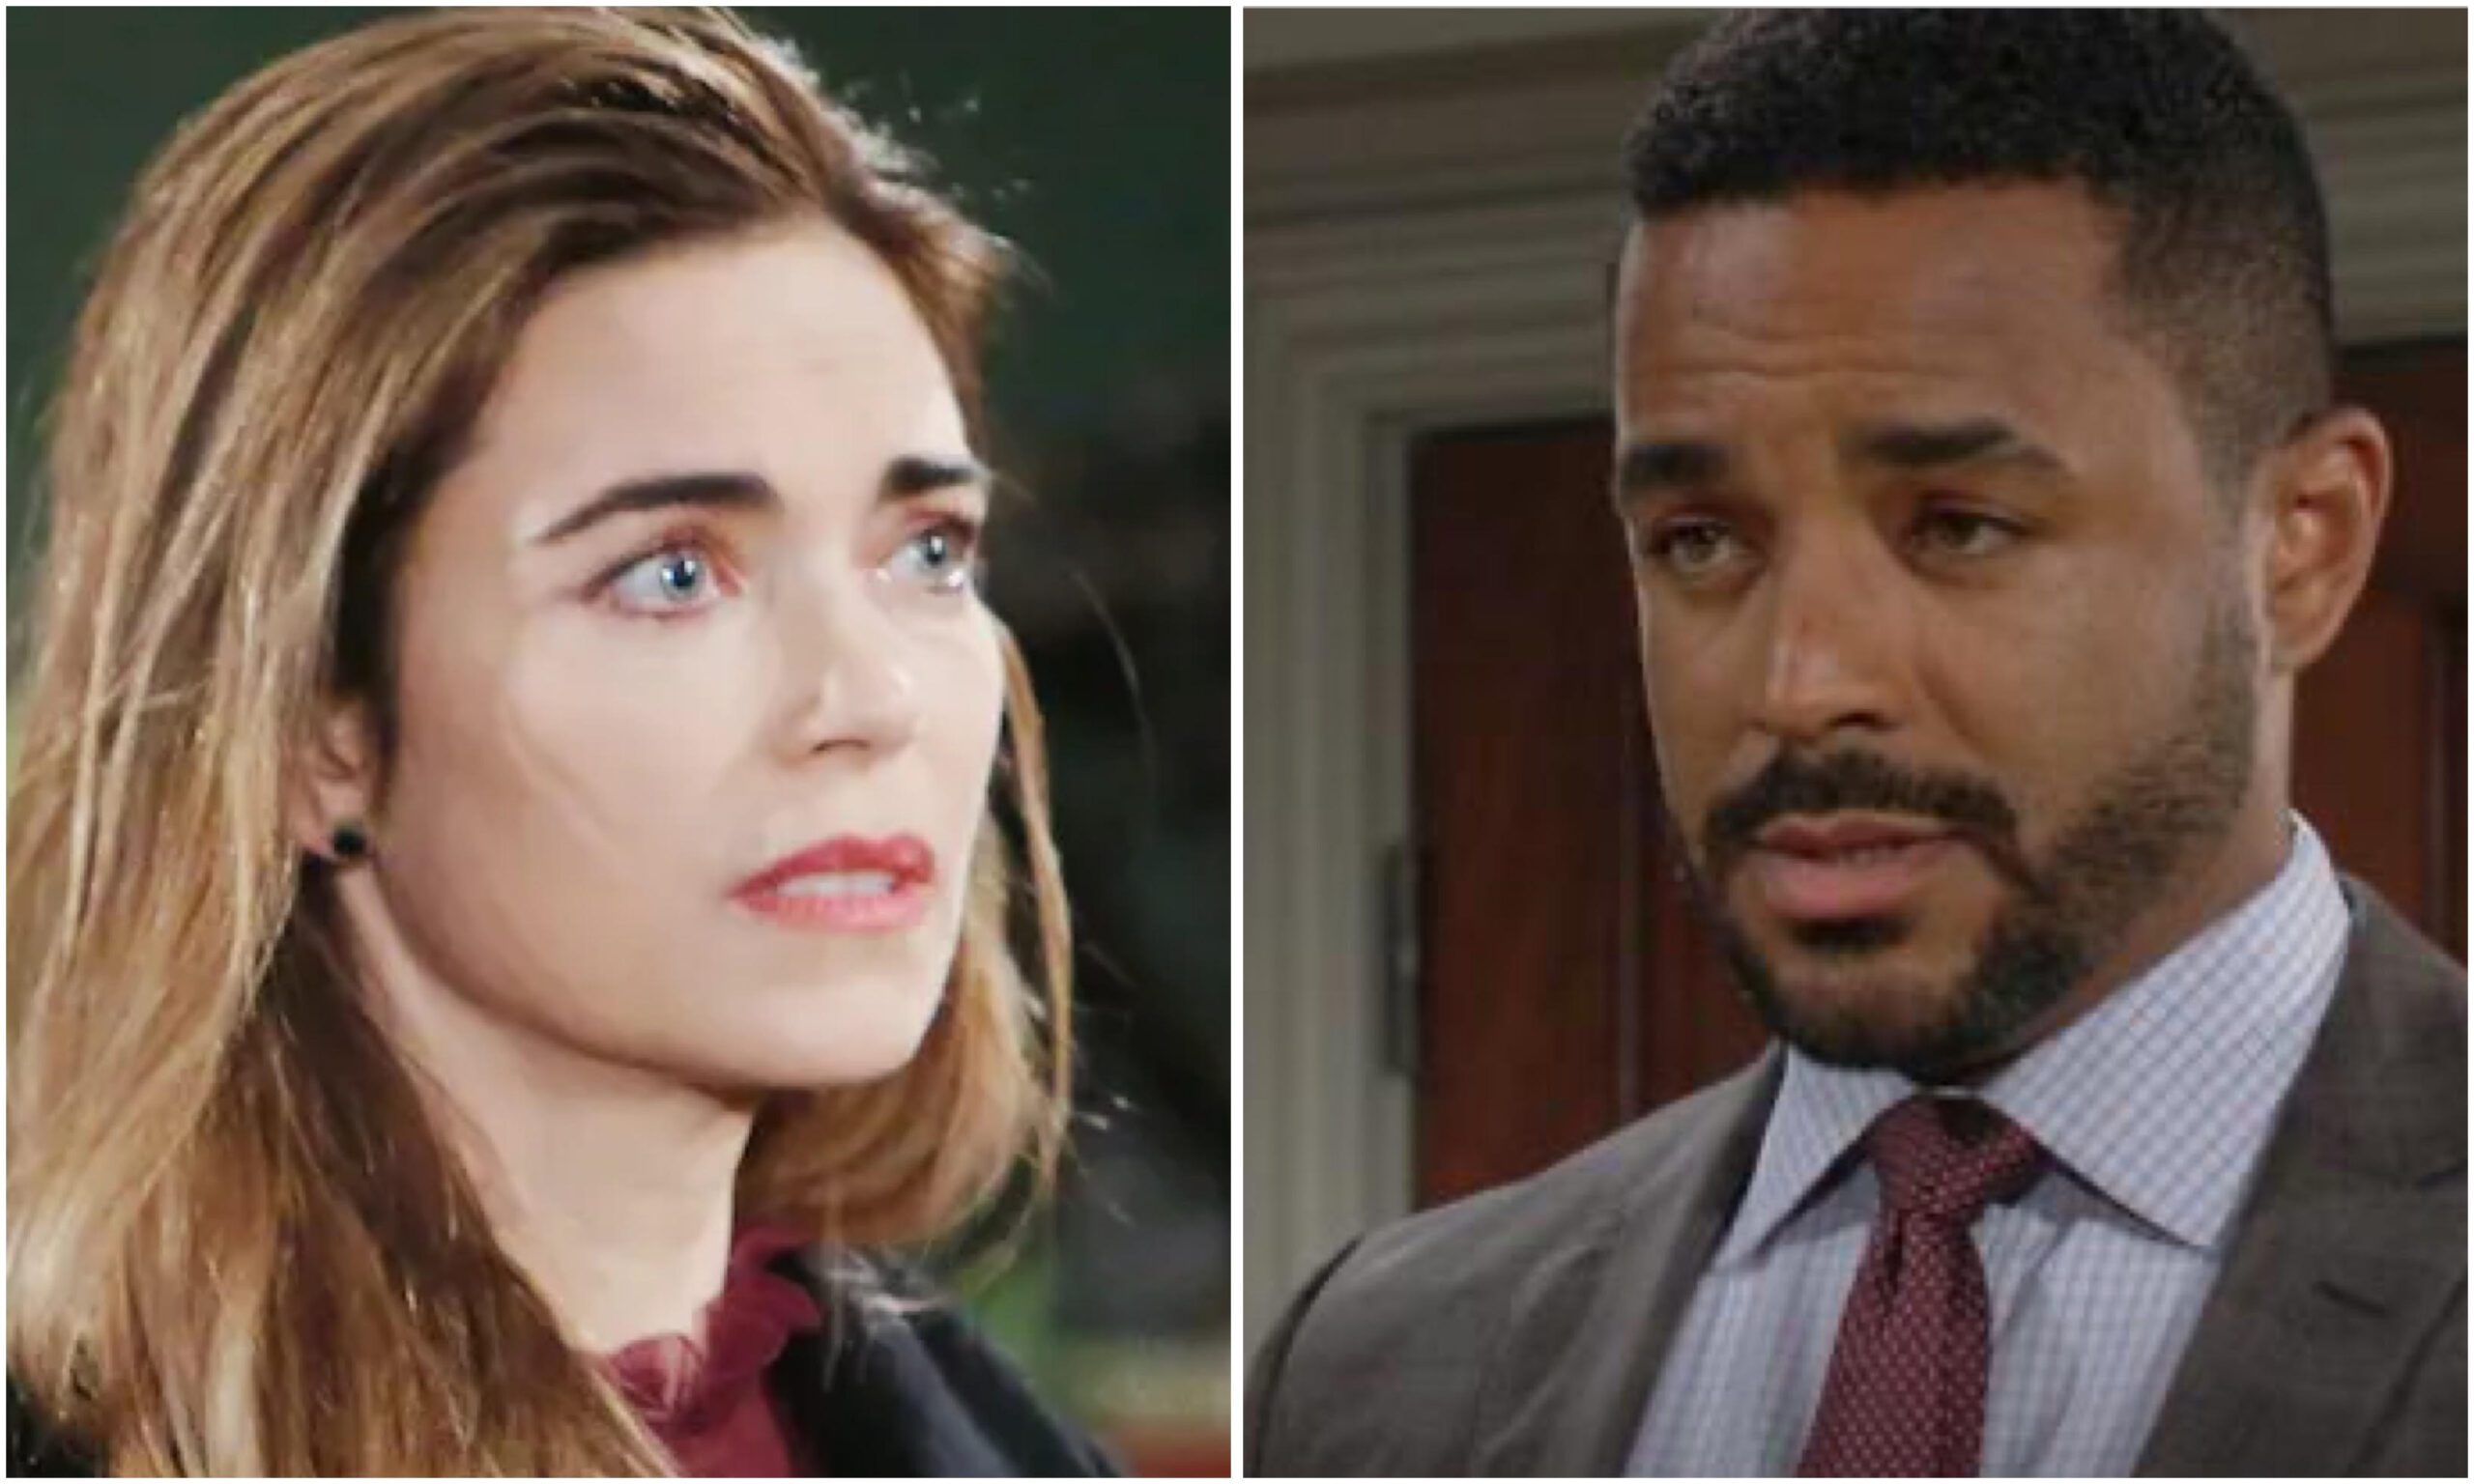 The Young and the Restless spoilers featuring Victoria Newman Nate Hastings